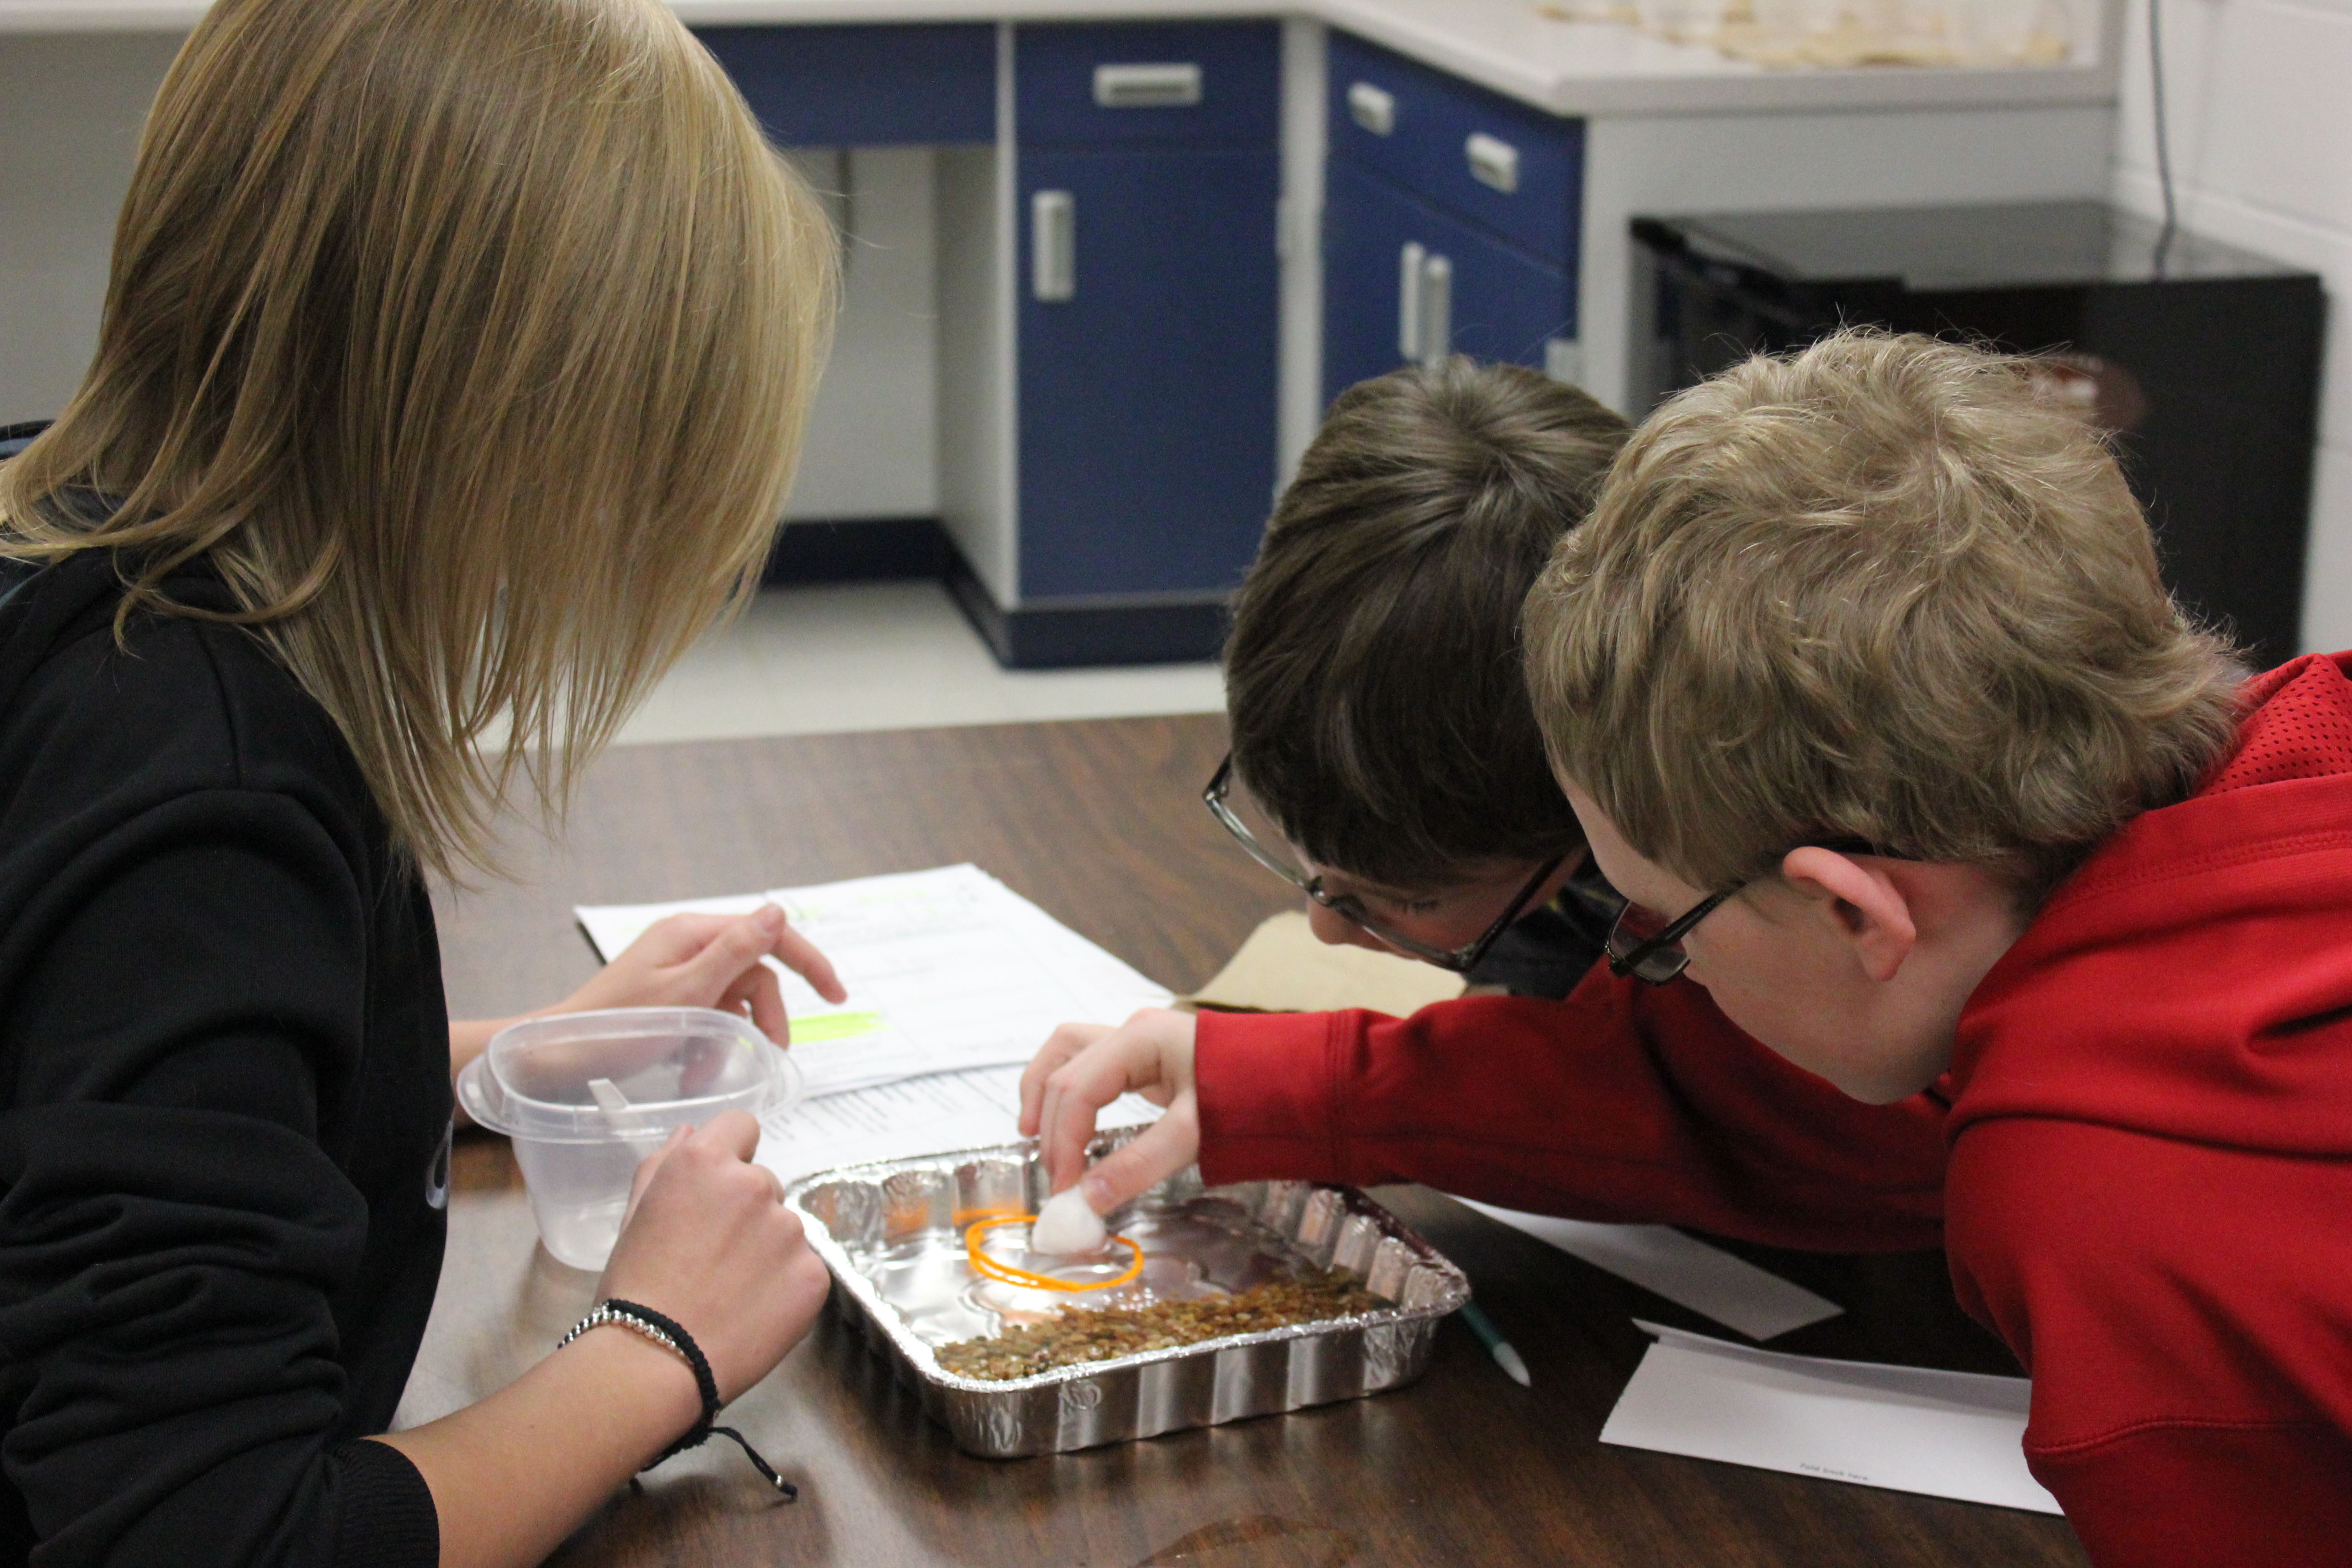 Lewis Central Middle School students use STEM Scale-Up program, "Engineering is Elementary" 